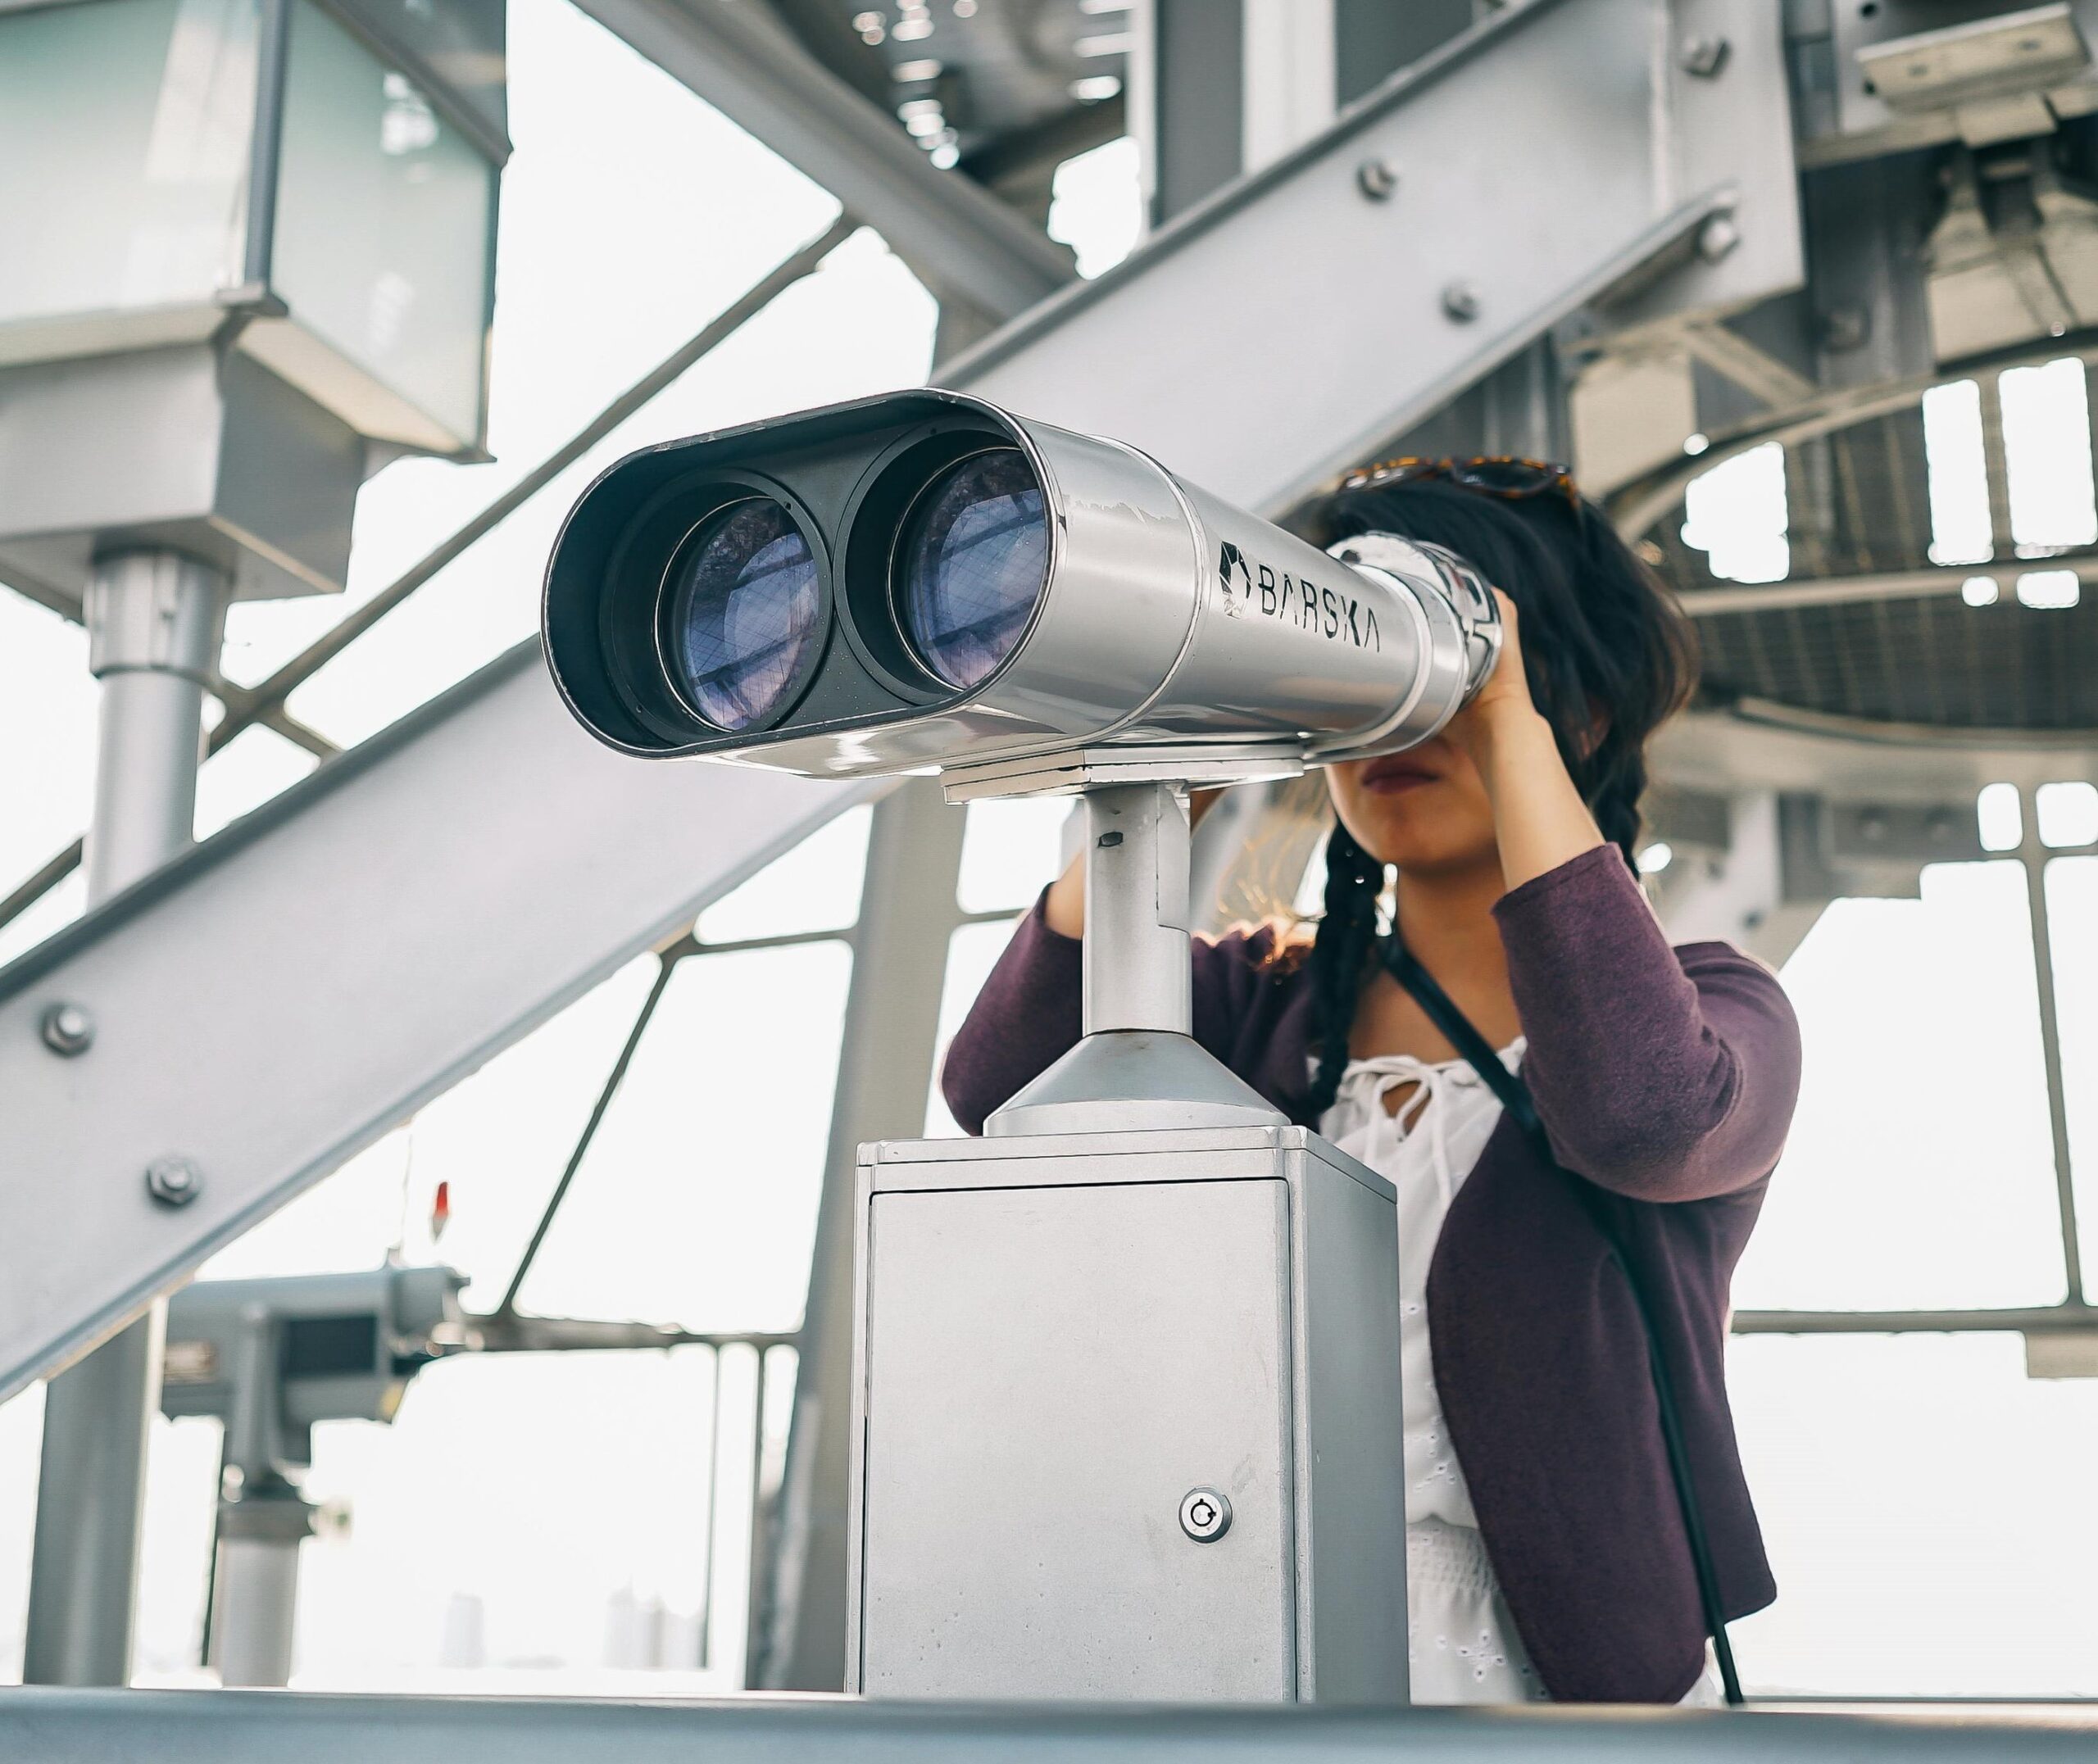 A photograph of a person wearing a purple cardigan and a white blouse looks out from a large binocular stand on the viewing deck of a tall building. The binoculars are pointed towards the left side of the photograph.